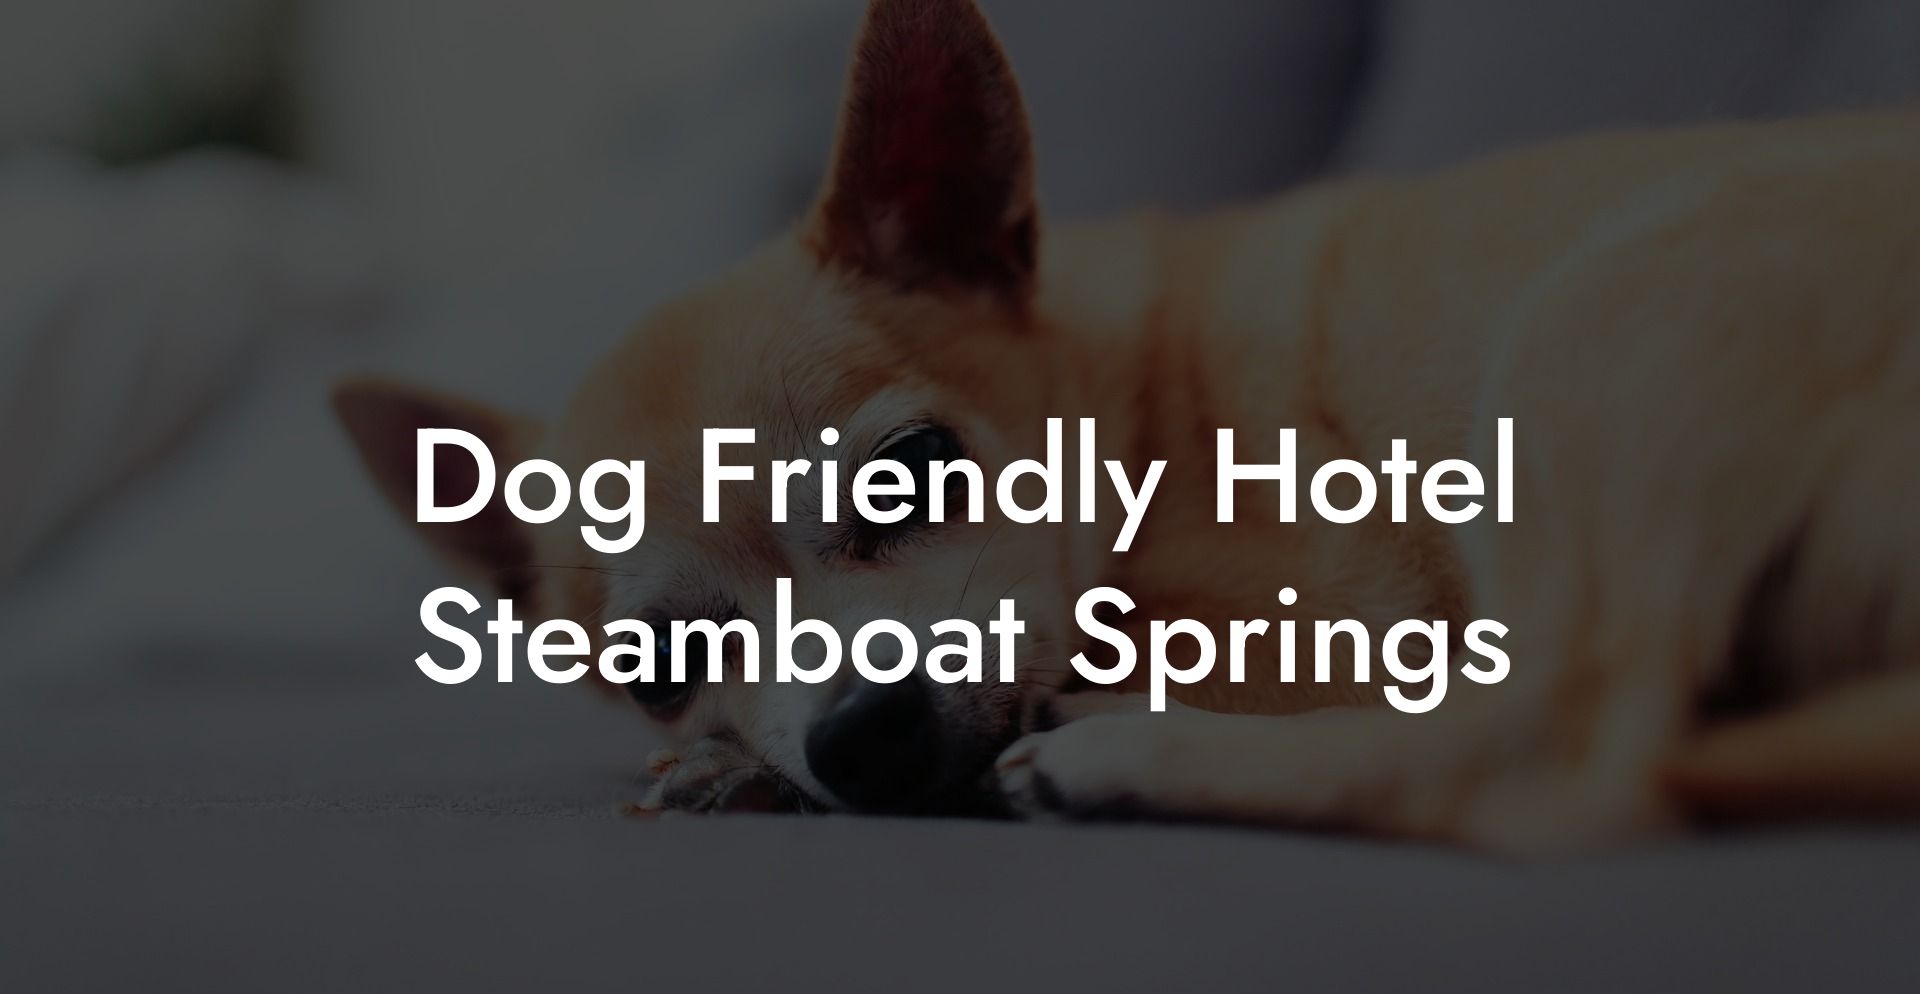 Dog Friendly Hotel Steamboat Springs